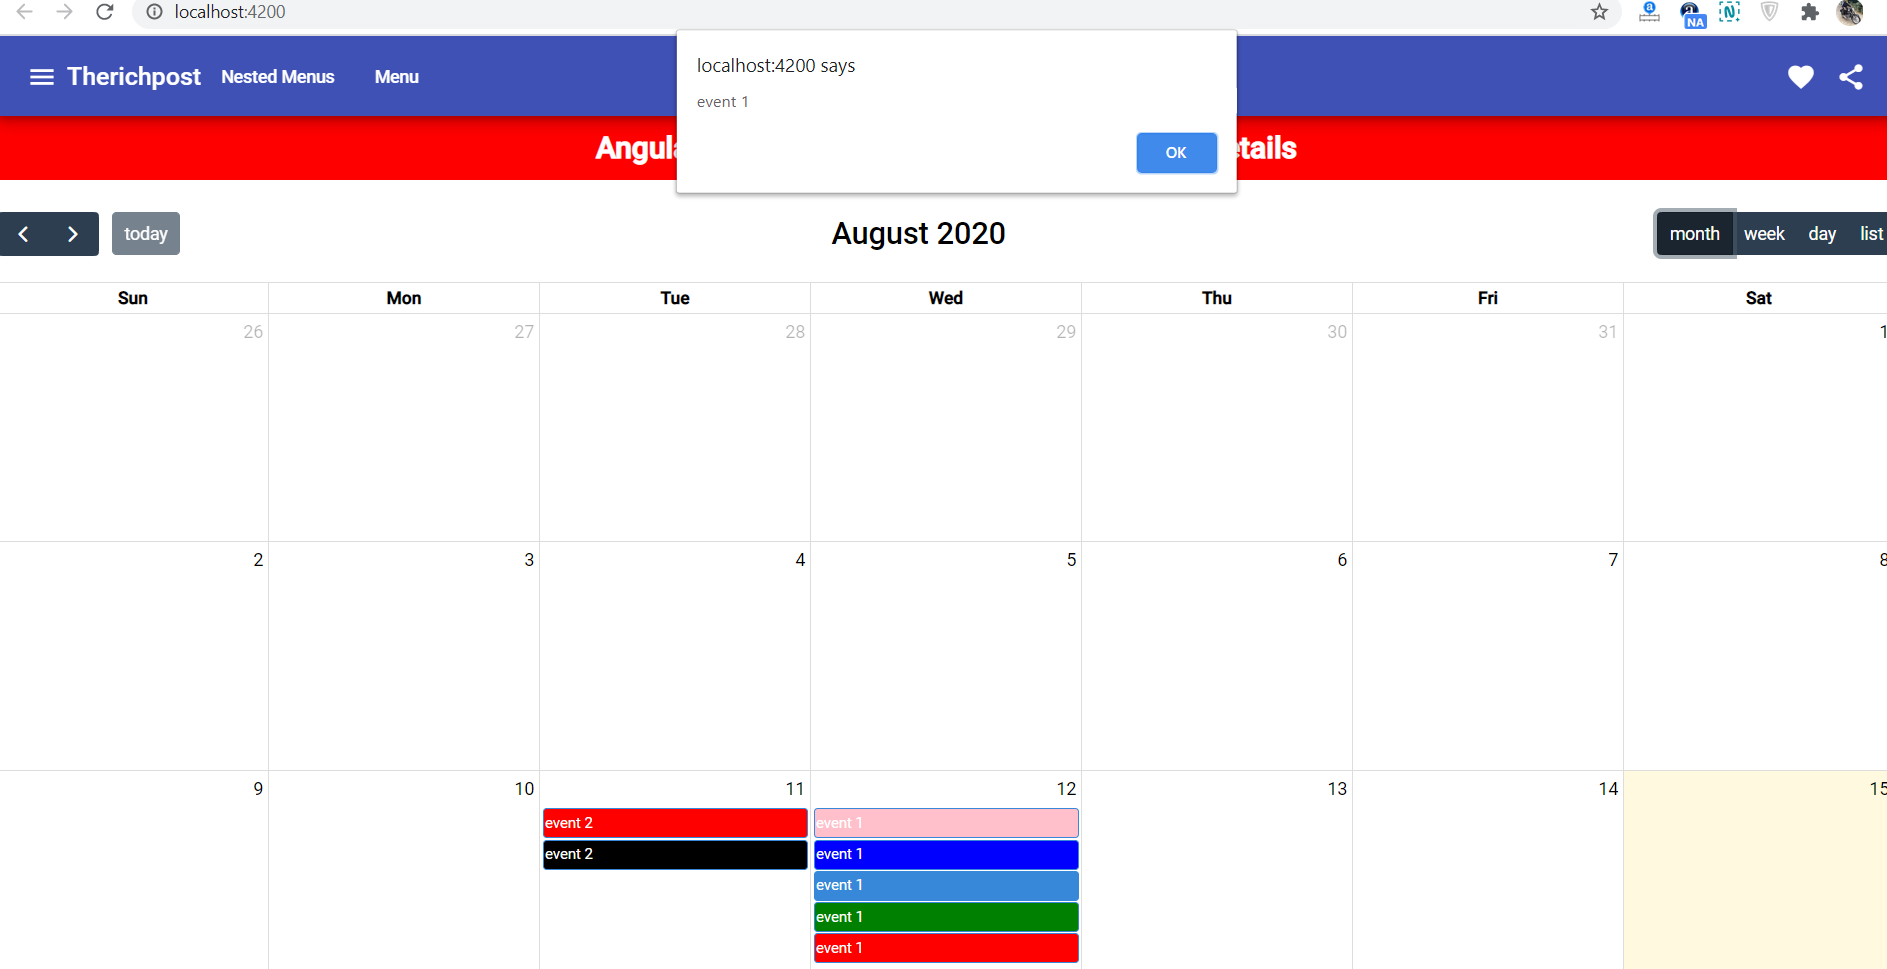 How to get event details on event click fullcalendar in angular 10?